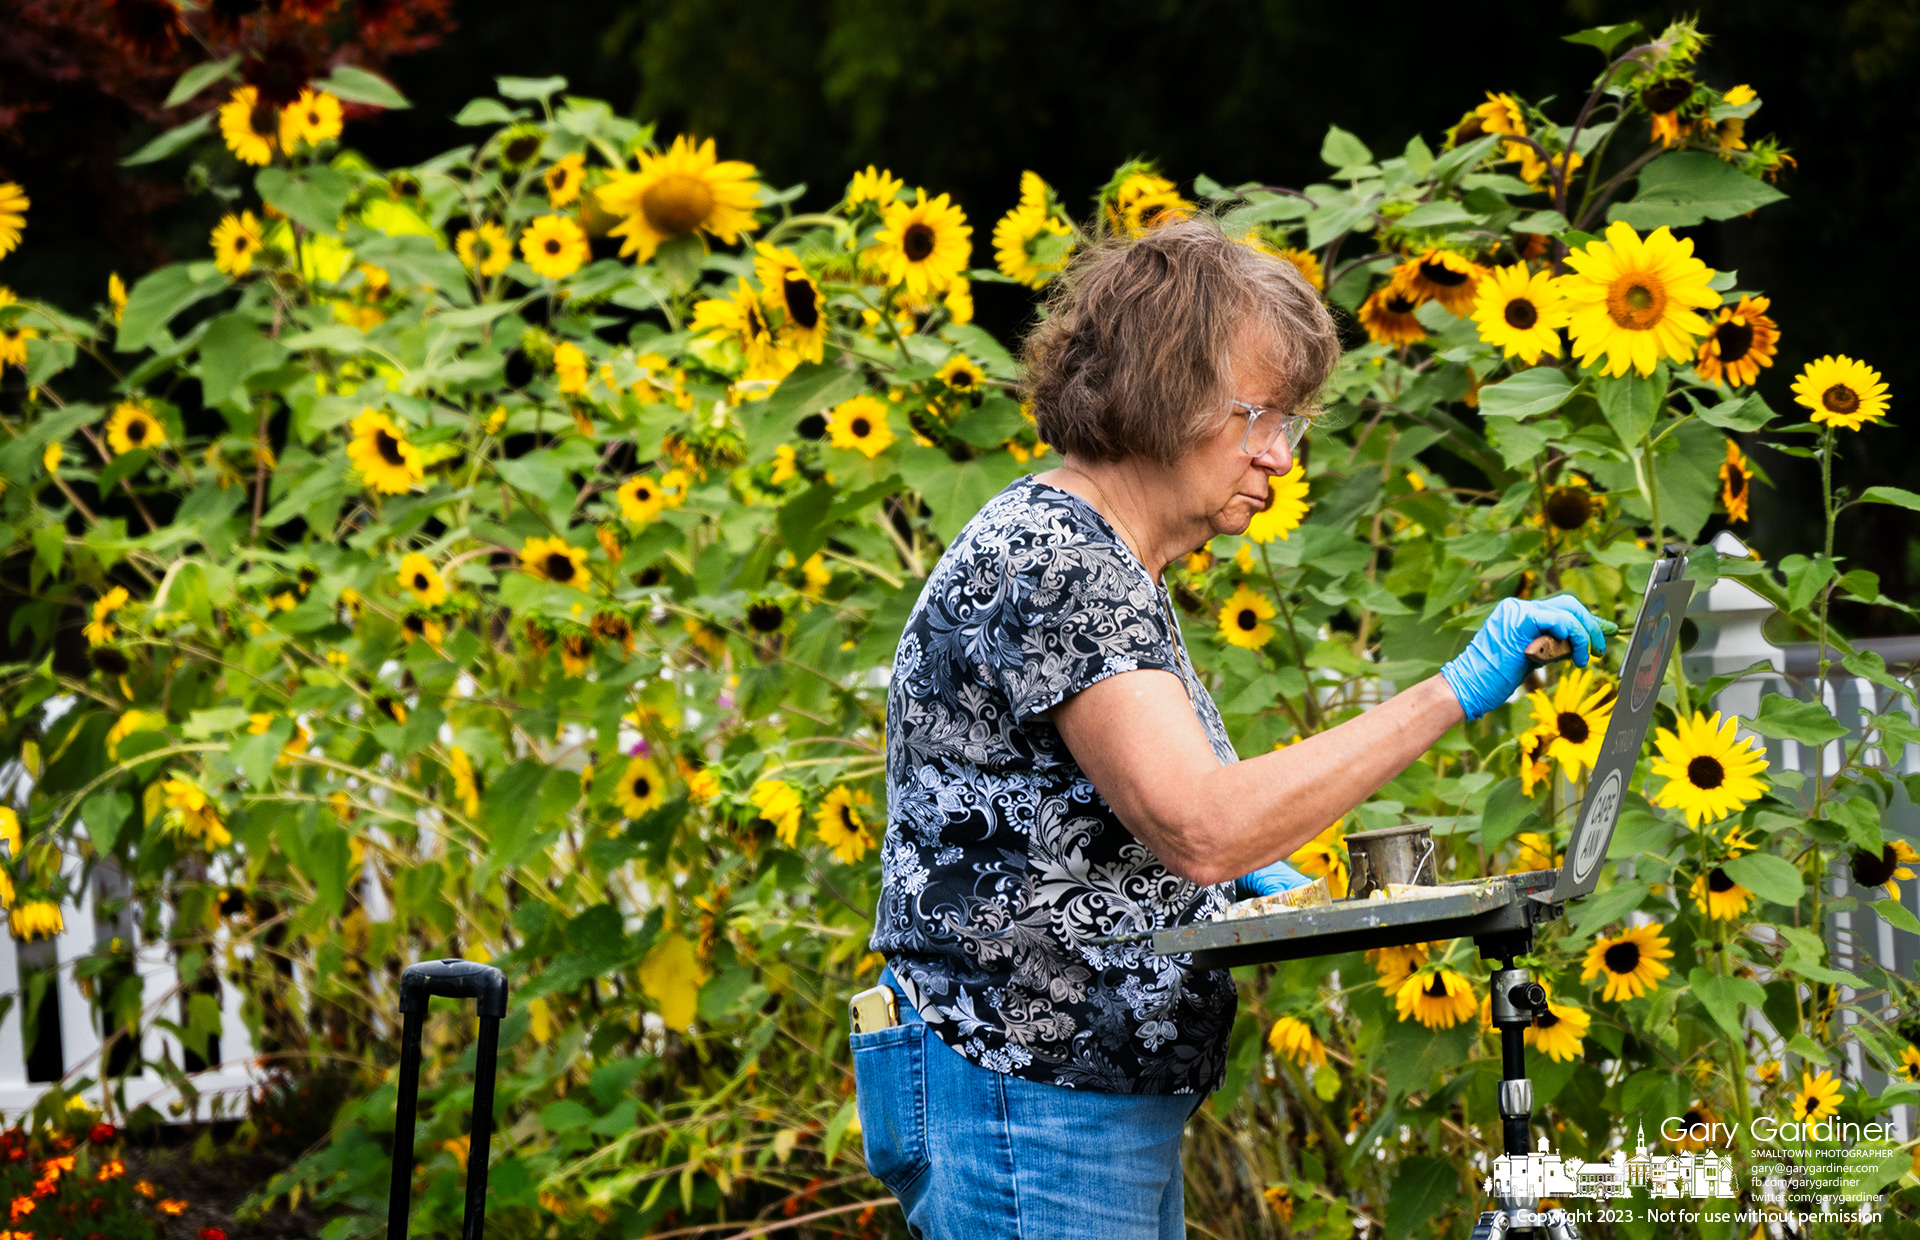 A plein air artist begins her art class lesson with painting sunflowers along the fence at the edge of Heritage Park in Westerville. My Final Photo for September 13, 2023.